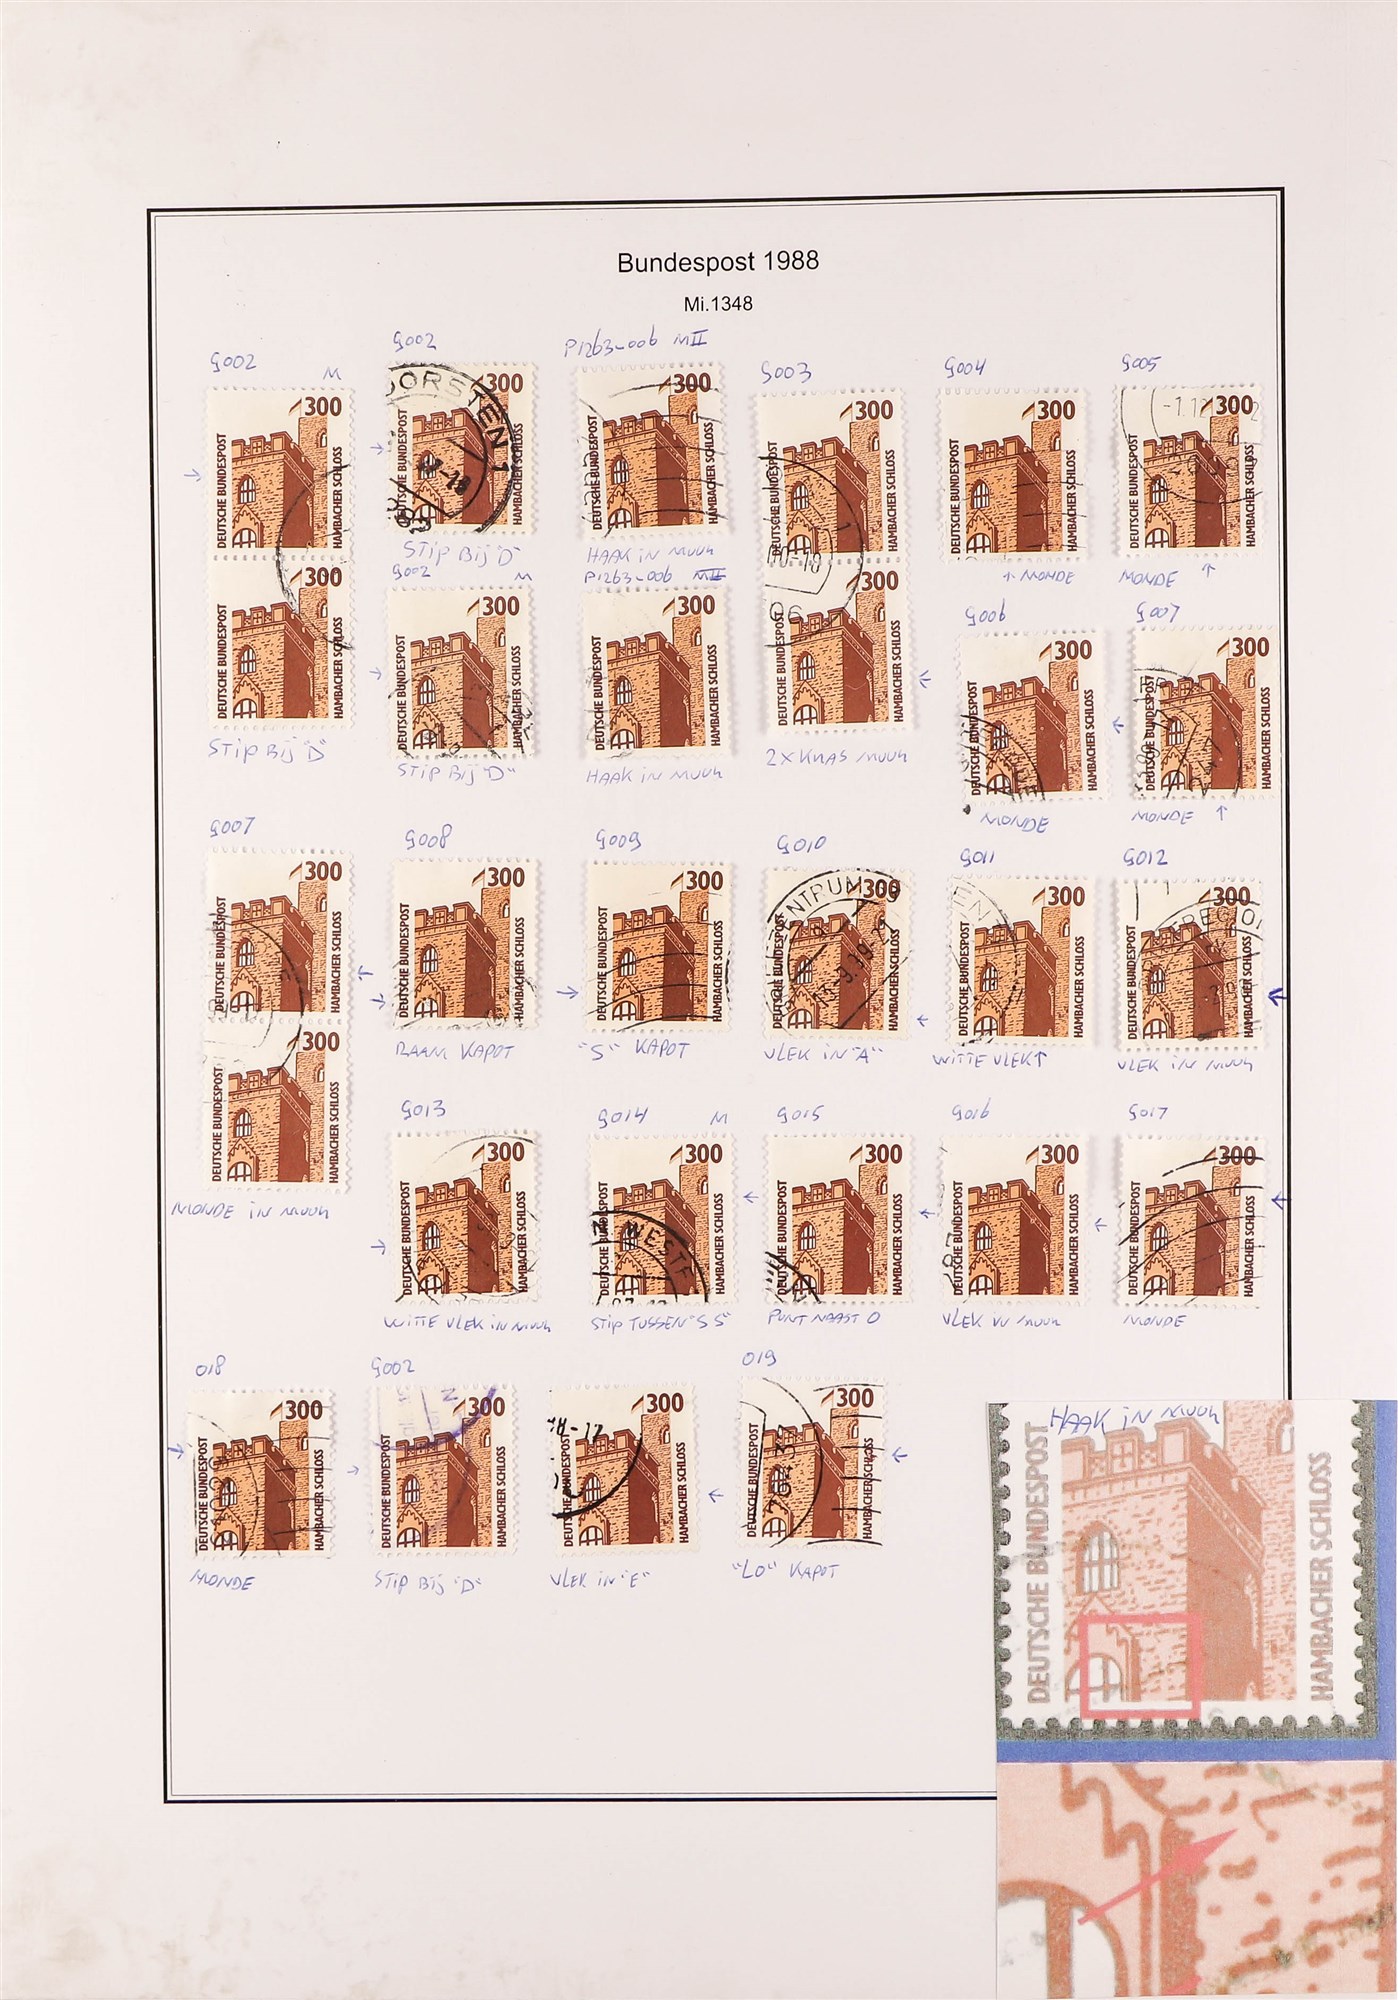 GERMANY WEST 1980 - 1989 SPECIALIZED COLLECTION of 800+ mint, never hinged mint and used stamps, - Image 5 of 10